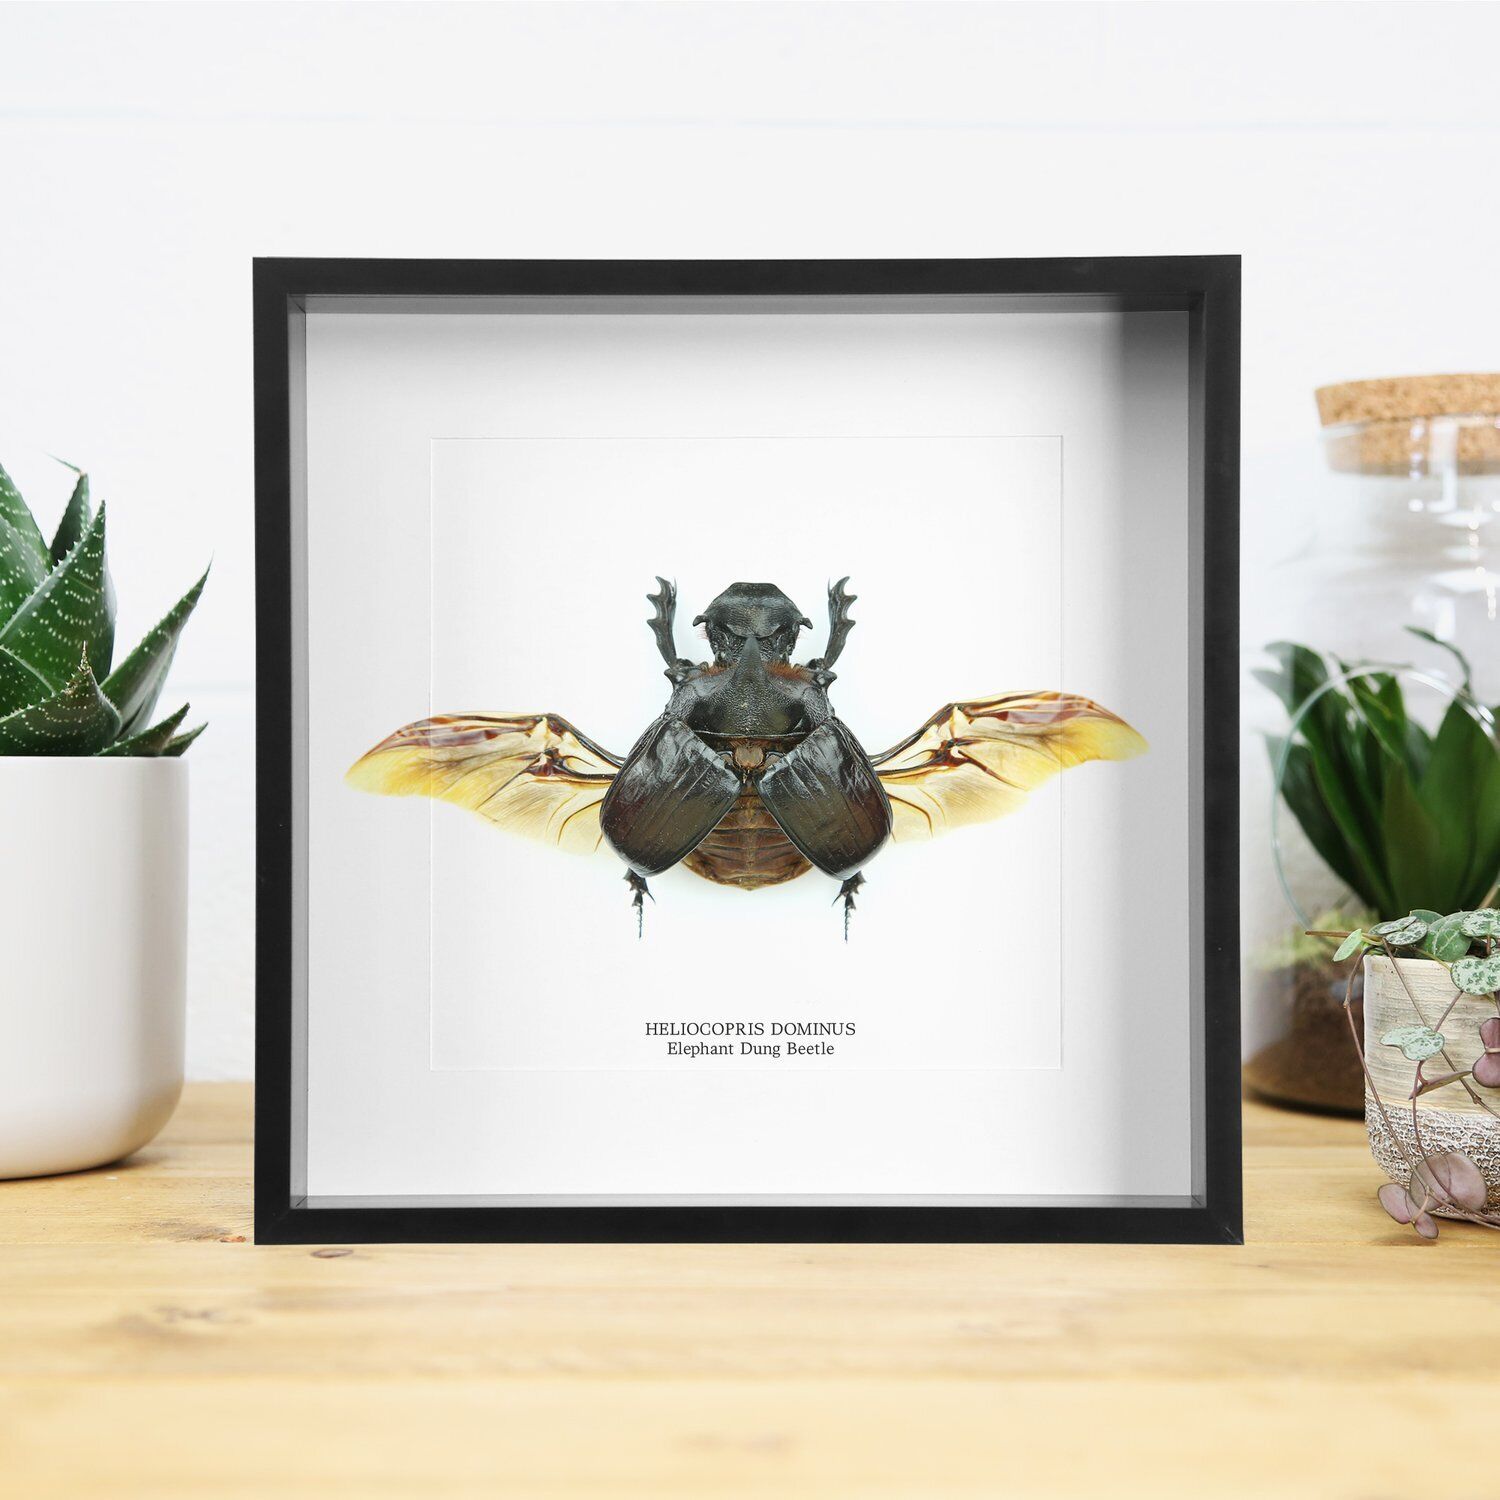 Elephant Dung Beetle (Spread Wings)  Bug Handcrafted Entomology taxidermy Frame